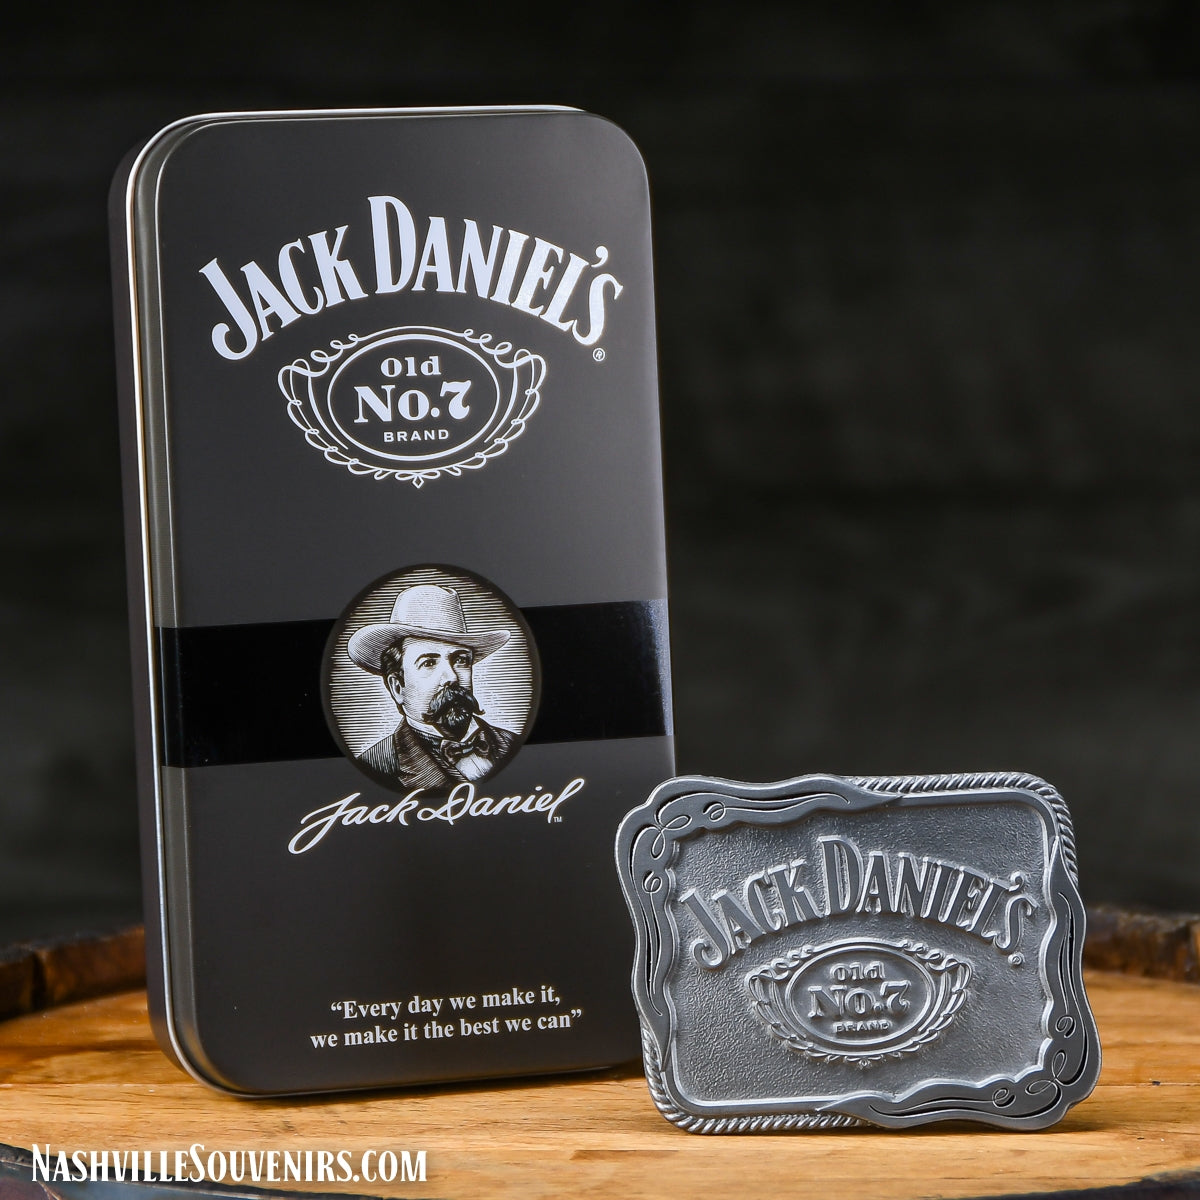 Officially licensed Jack Daniels Old No.7 Belt Buckle with Rope and Scroll Edge. Get one today with FREE SHIPPING on all US orders over $75!